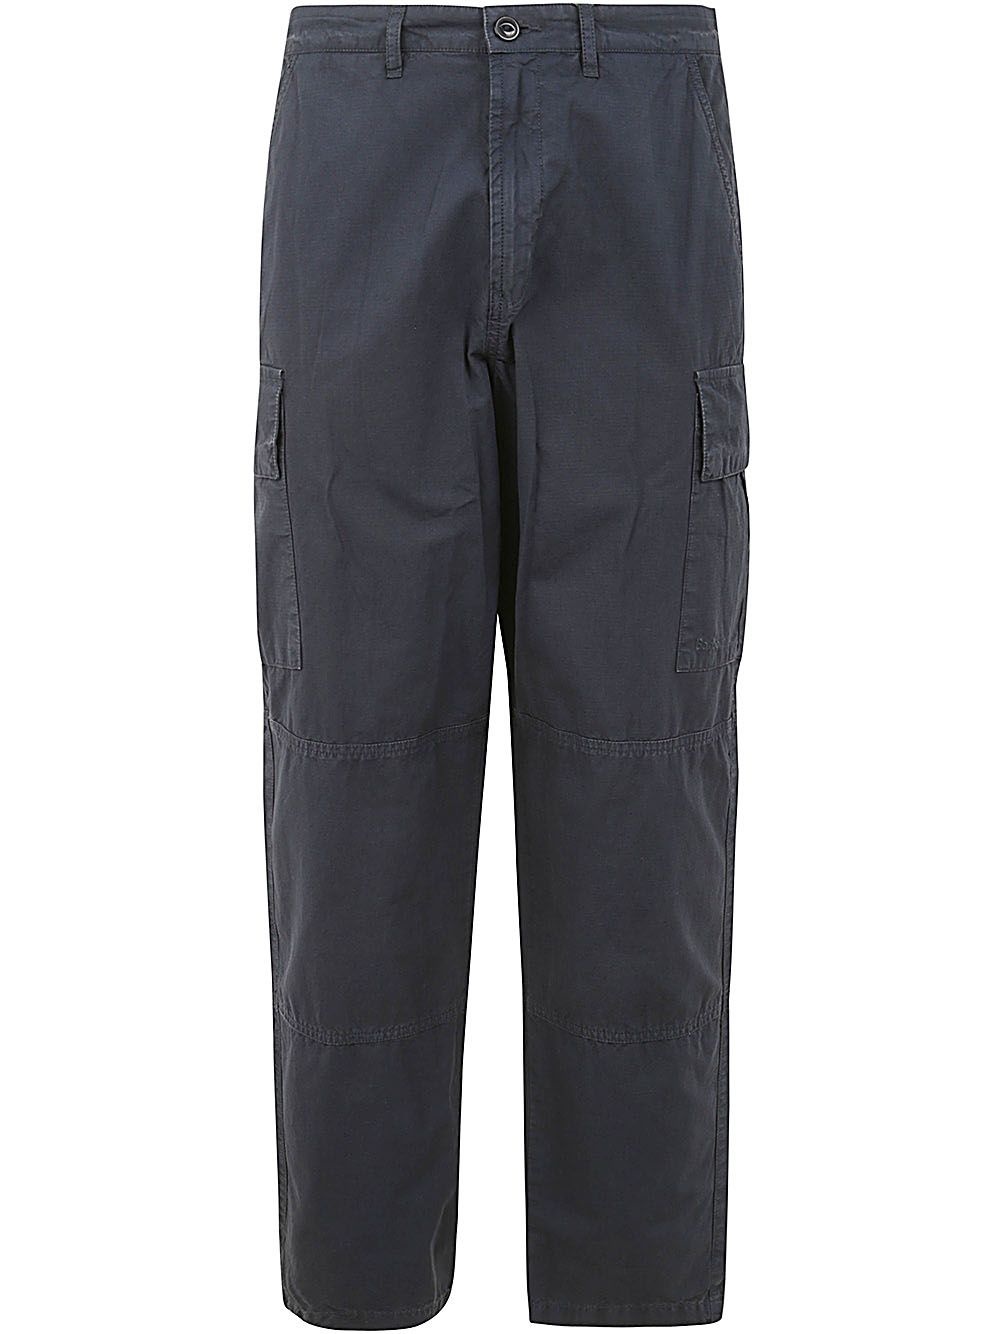 ESSENTIAL RIPSTOP CARGO TROUSERS - 1